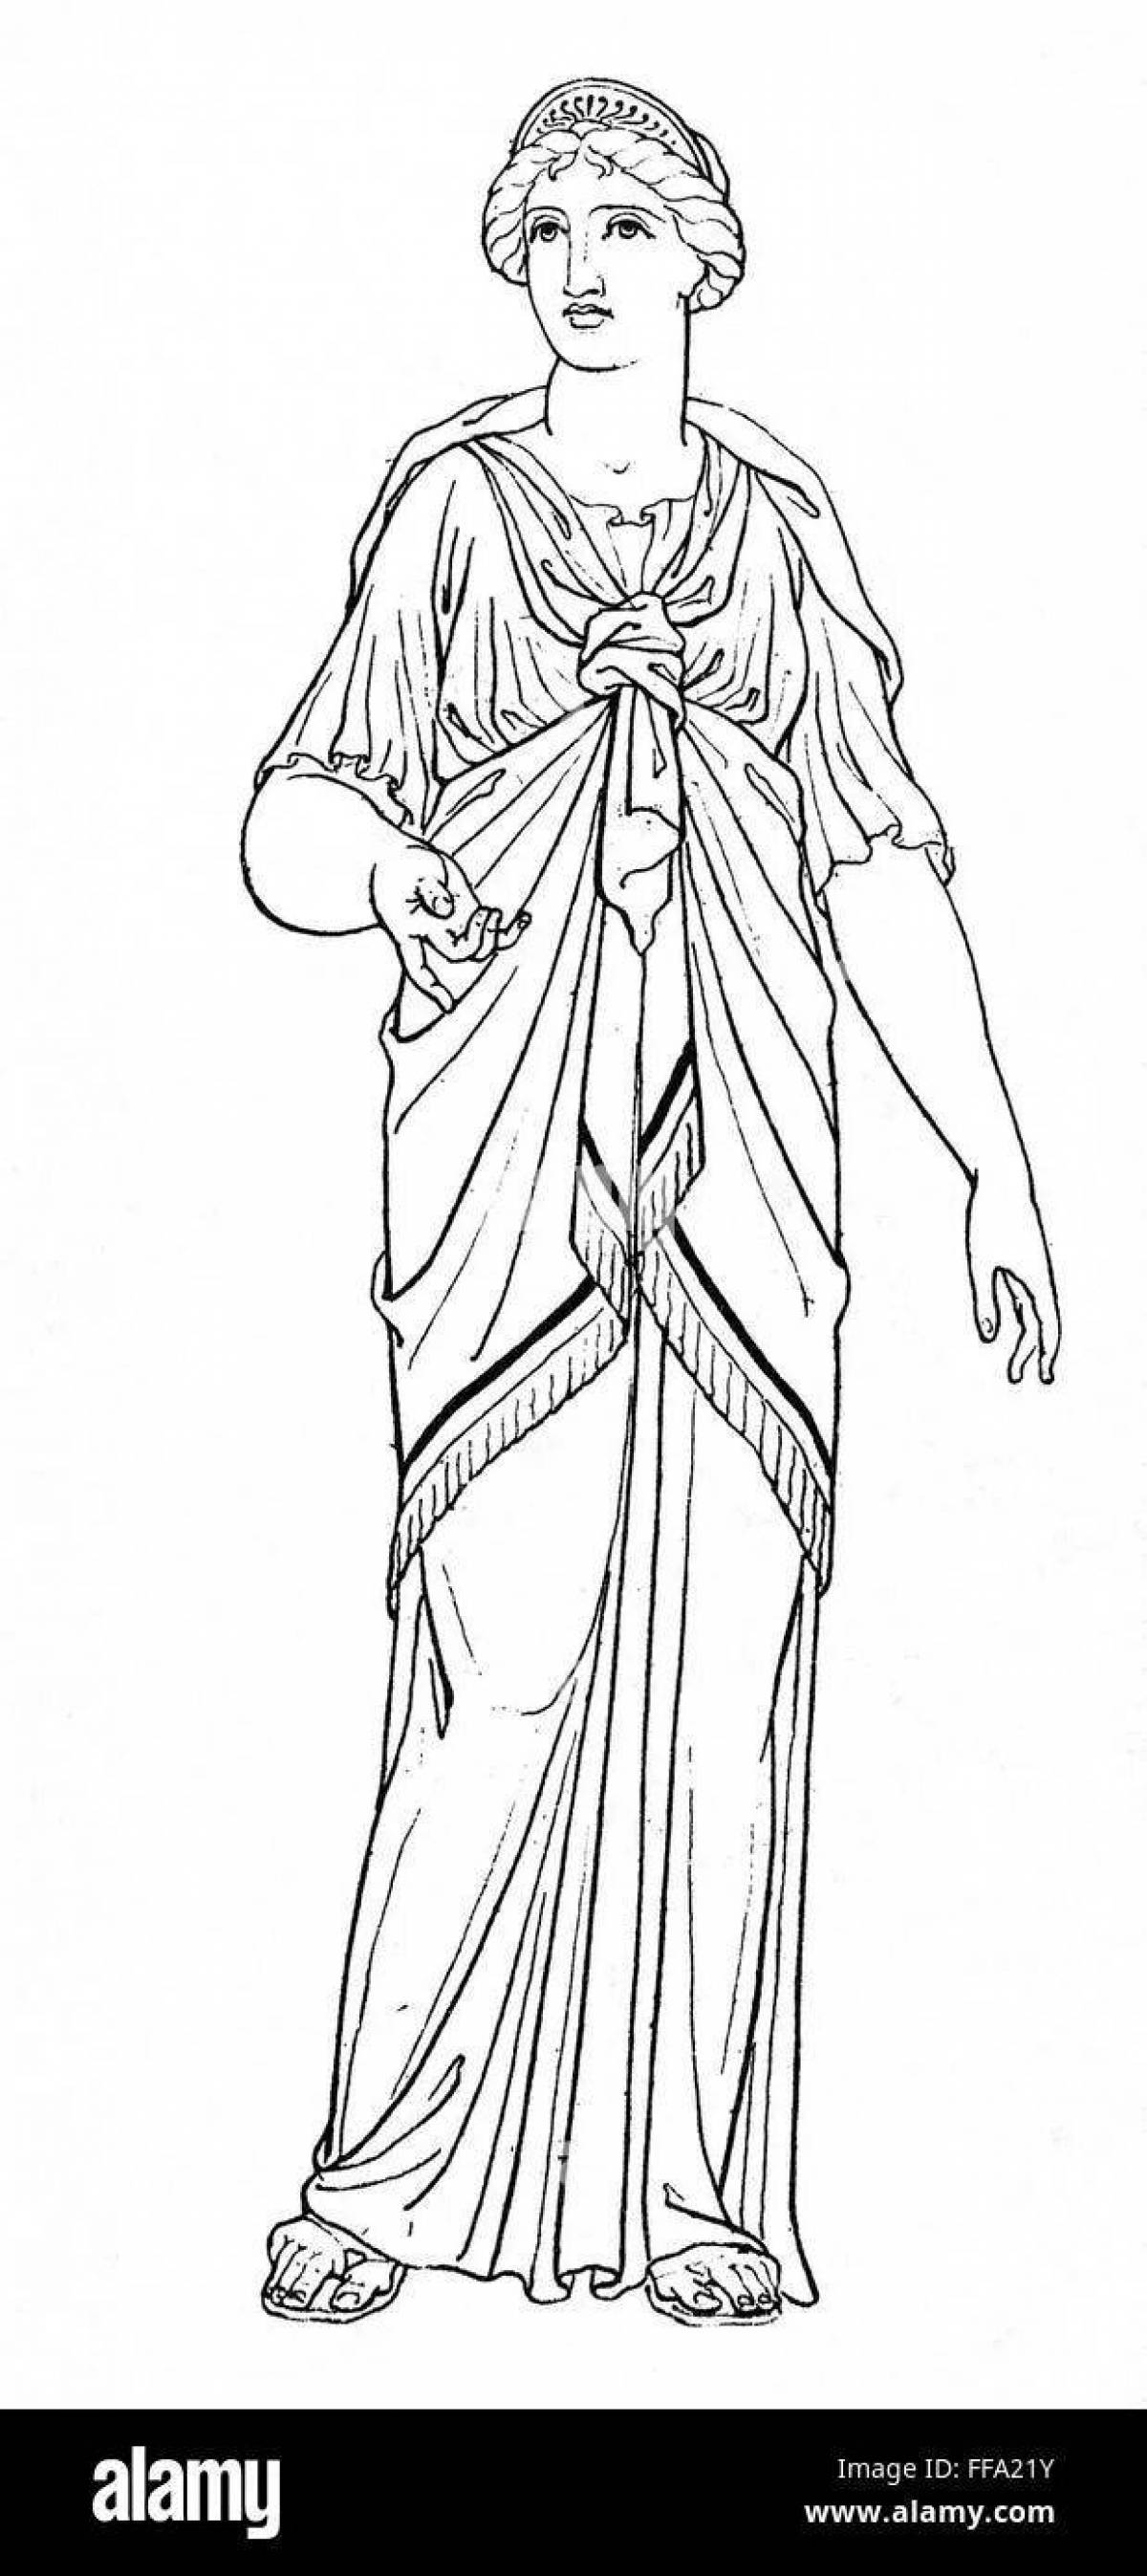 Exalted coloring of goddess hera